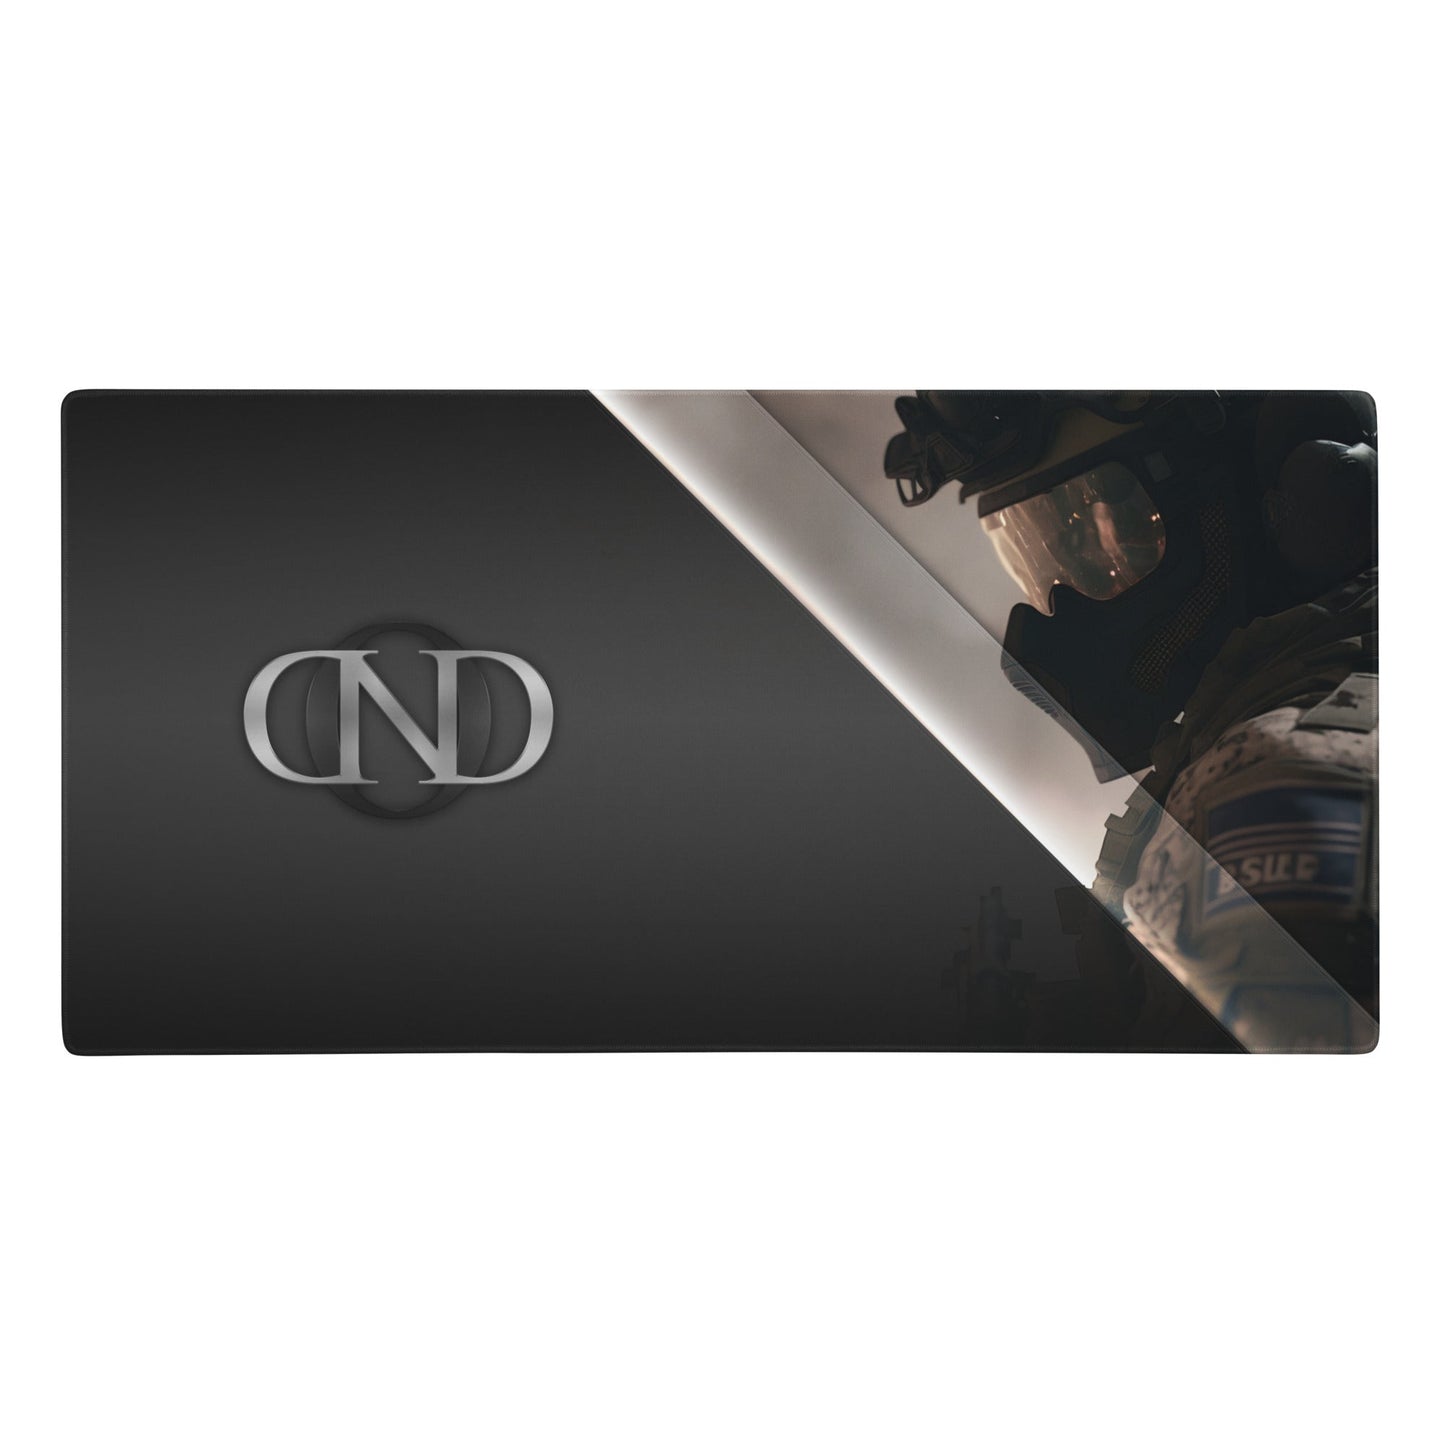 1 Operation Crows Nest Tactical Elite Gaming Mouse Pad